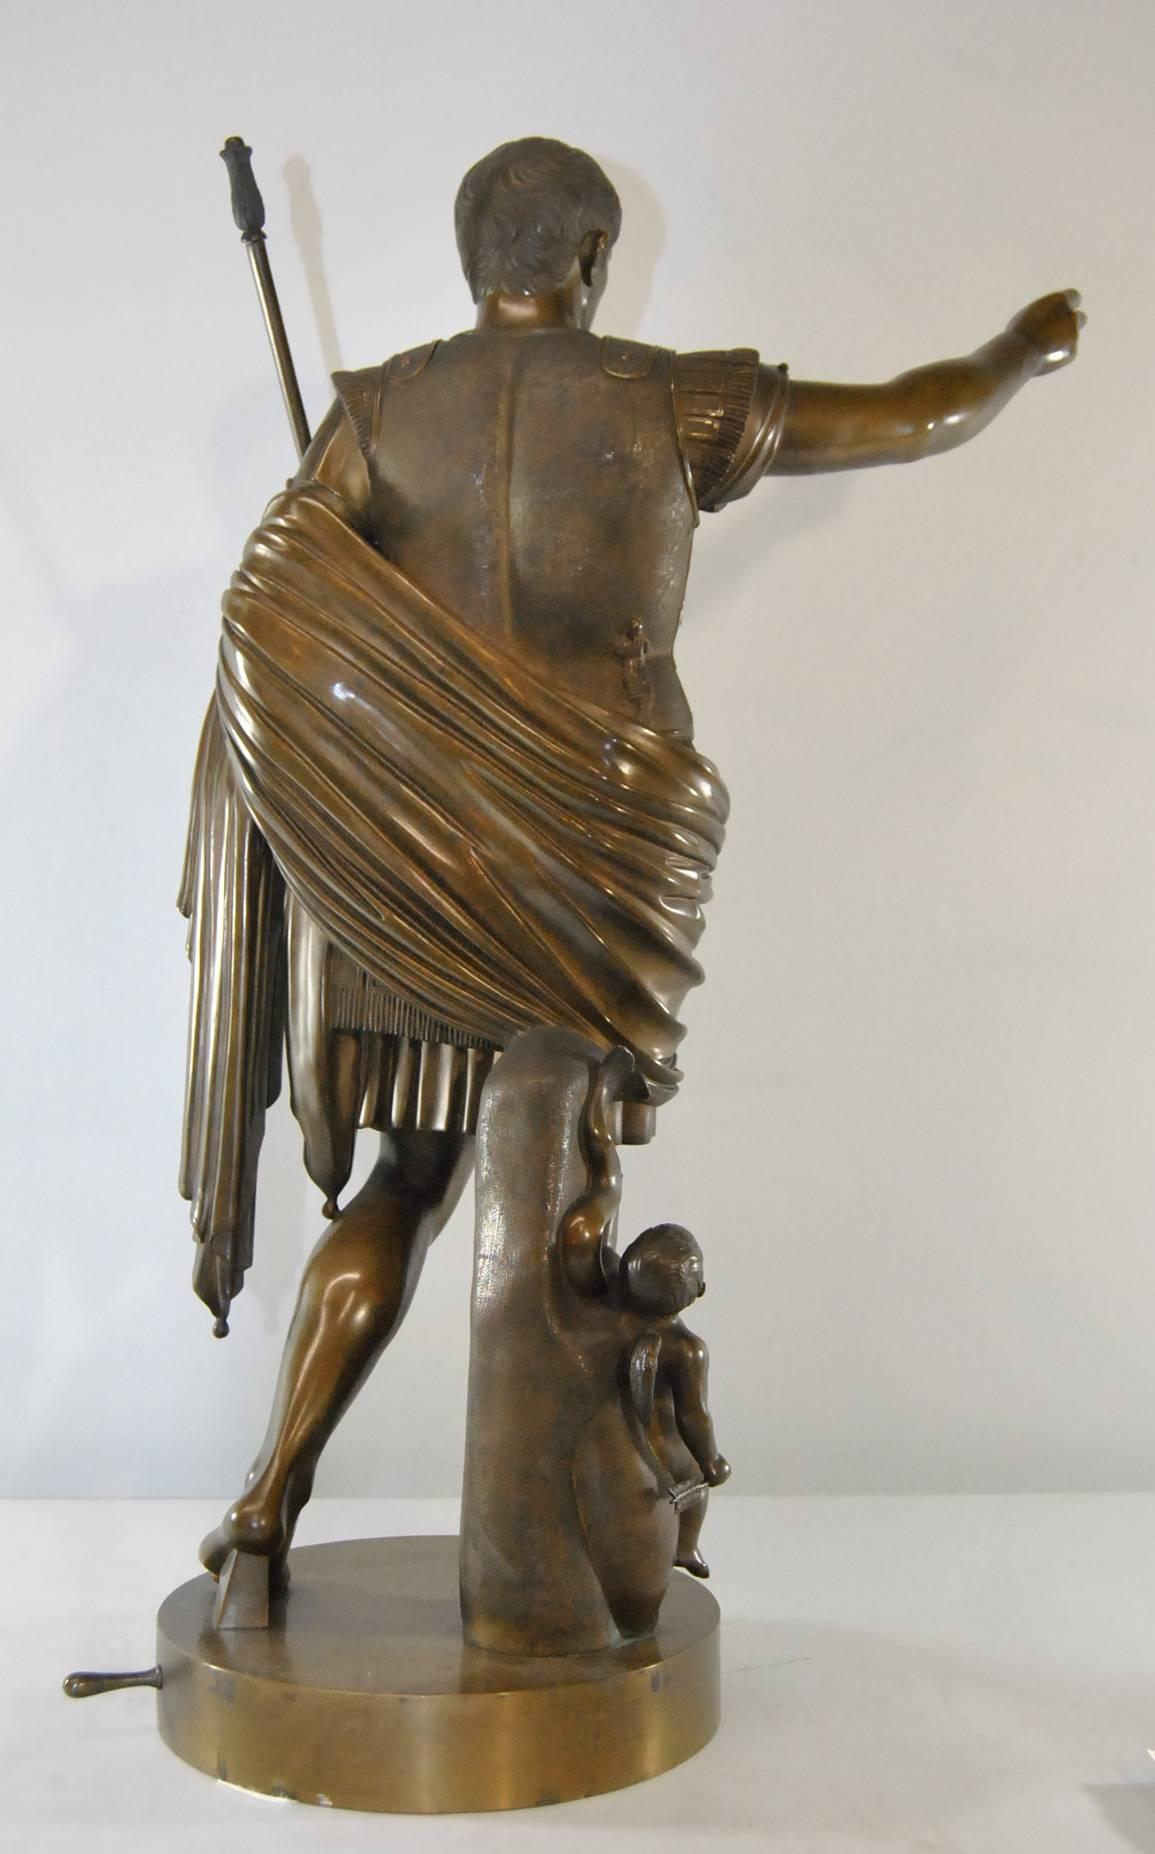 A finely cast patinated bronze of Augustus of Prima Porta: Modeled as a standing Caesar holding a scepter, having a putto at his feet astride a dolphin, with raised decoration on his chest plate; medium brown patina. Statue is 25.75